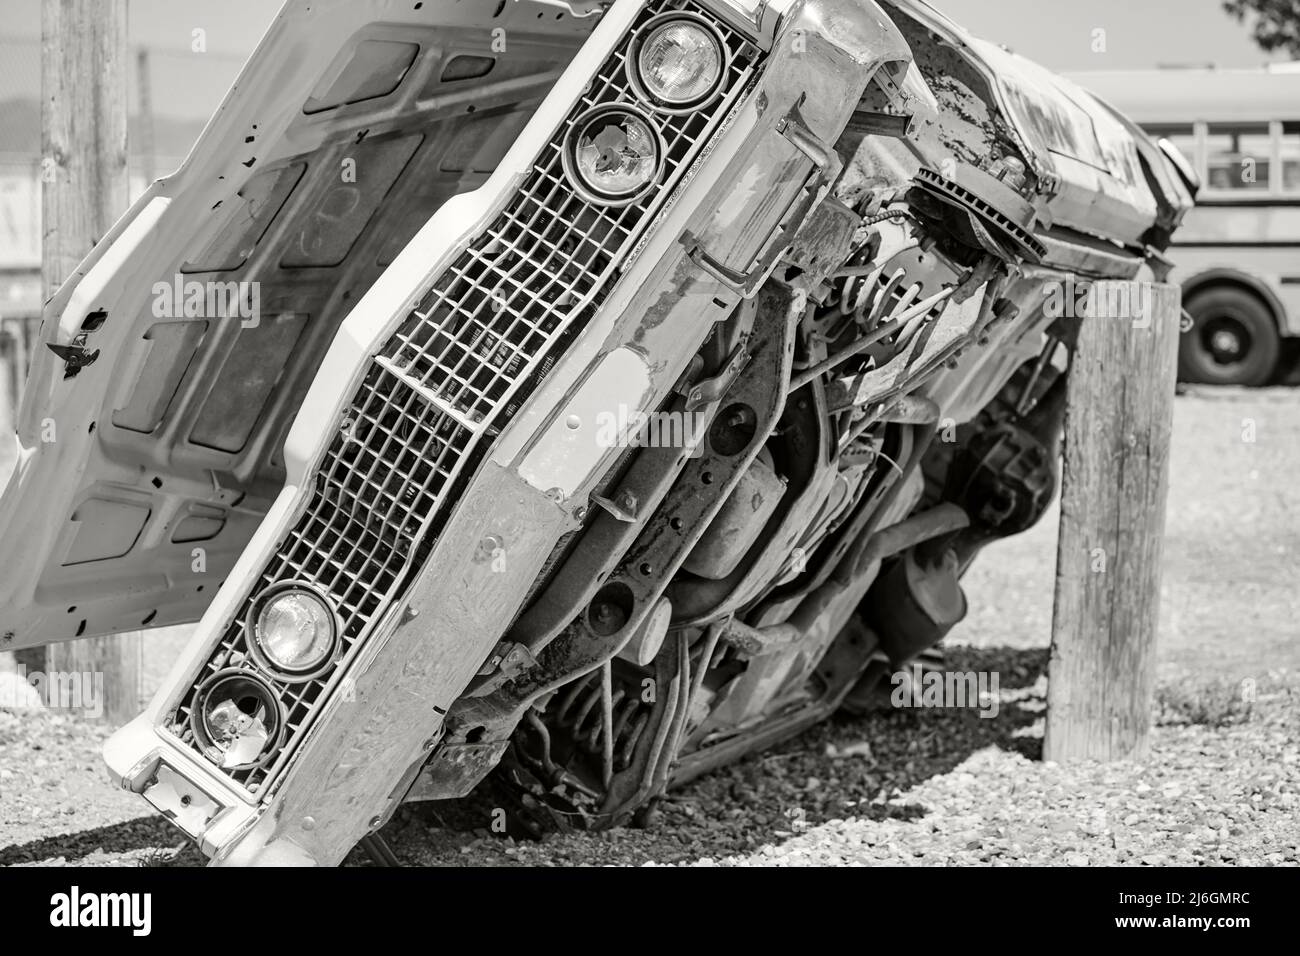 Vintage junked car propped on its side exposing the bottom of the car Stock Photo